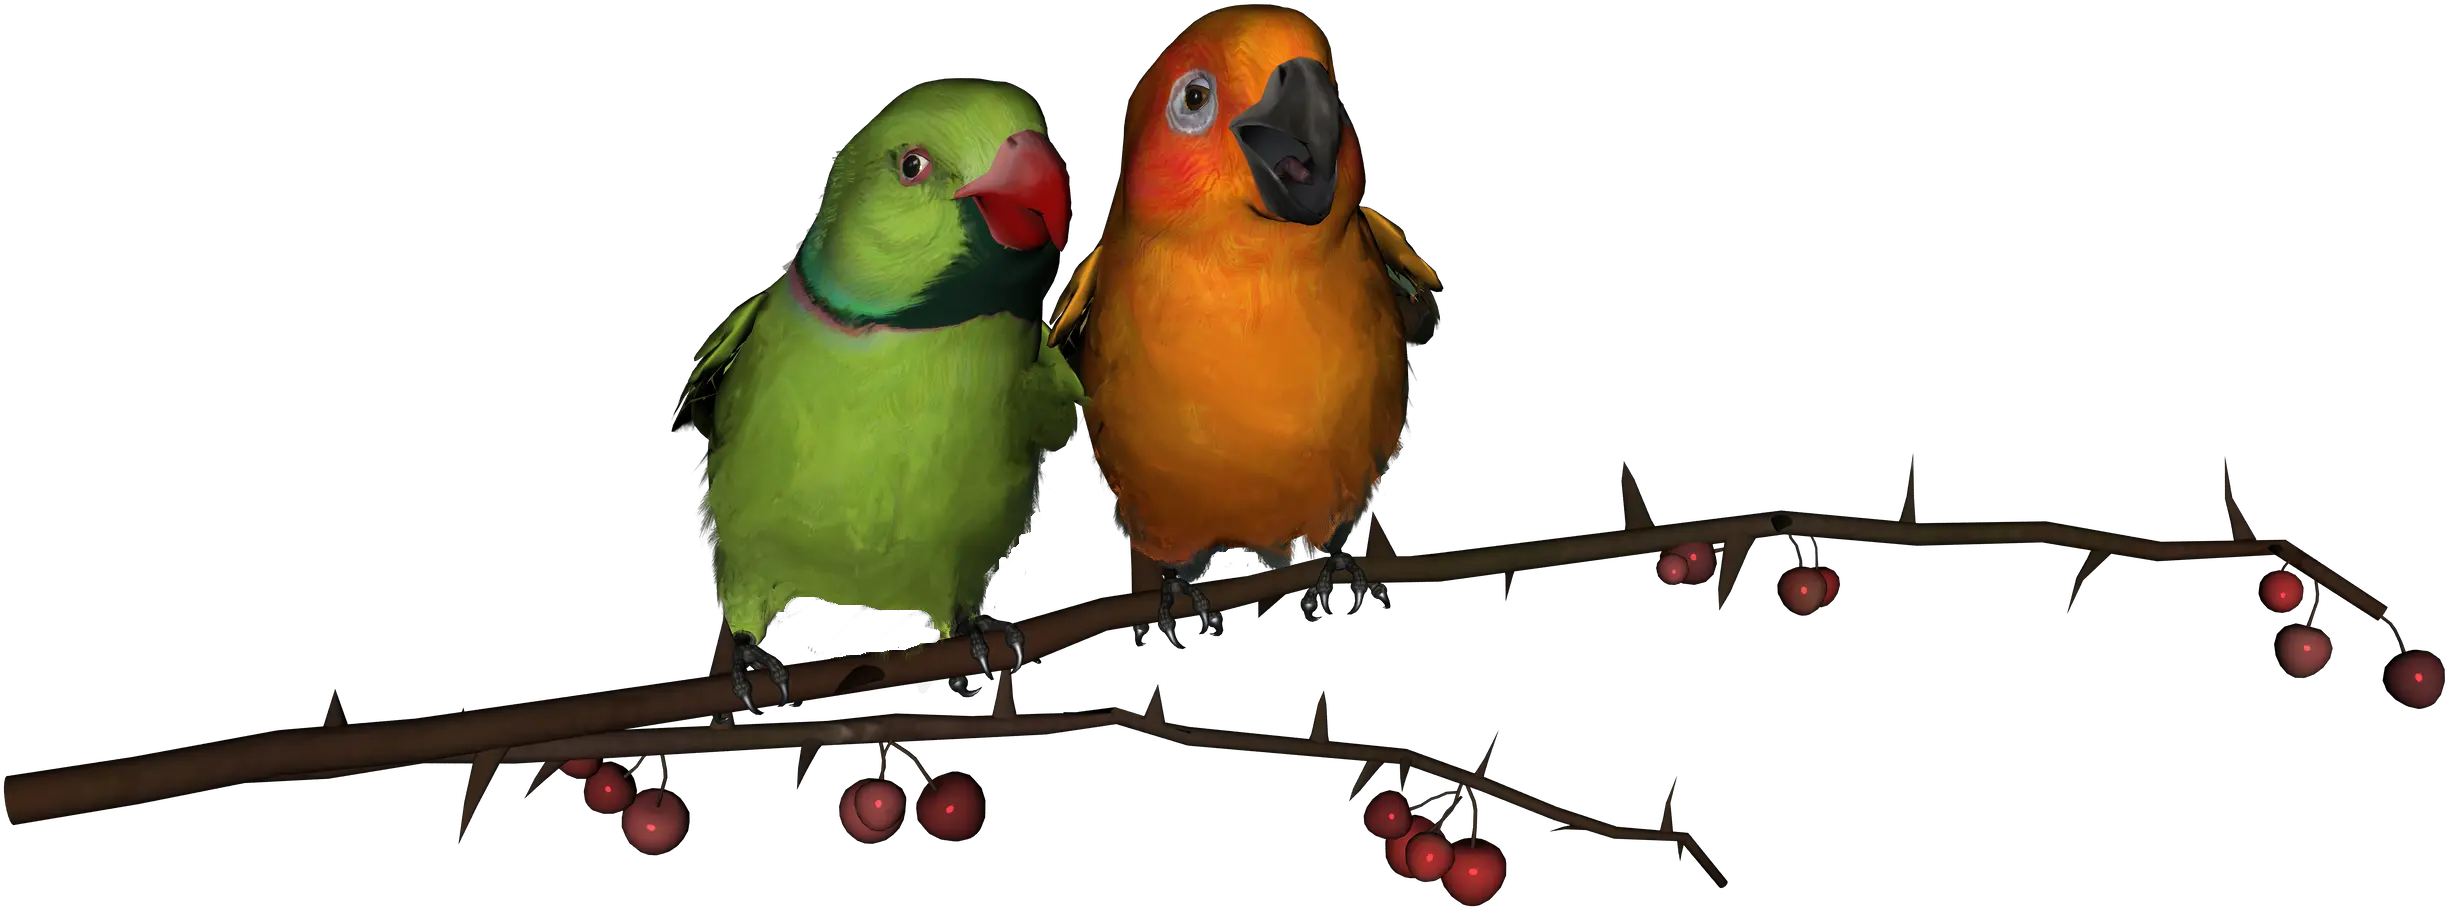 Lovebirds Png Transparent Free Images Only Love Birds Png Hd Branch Png